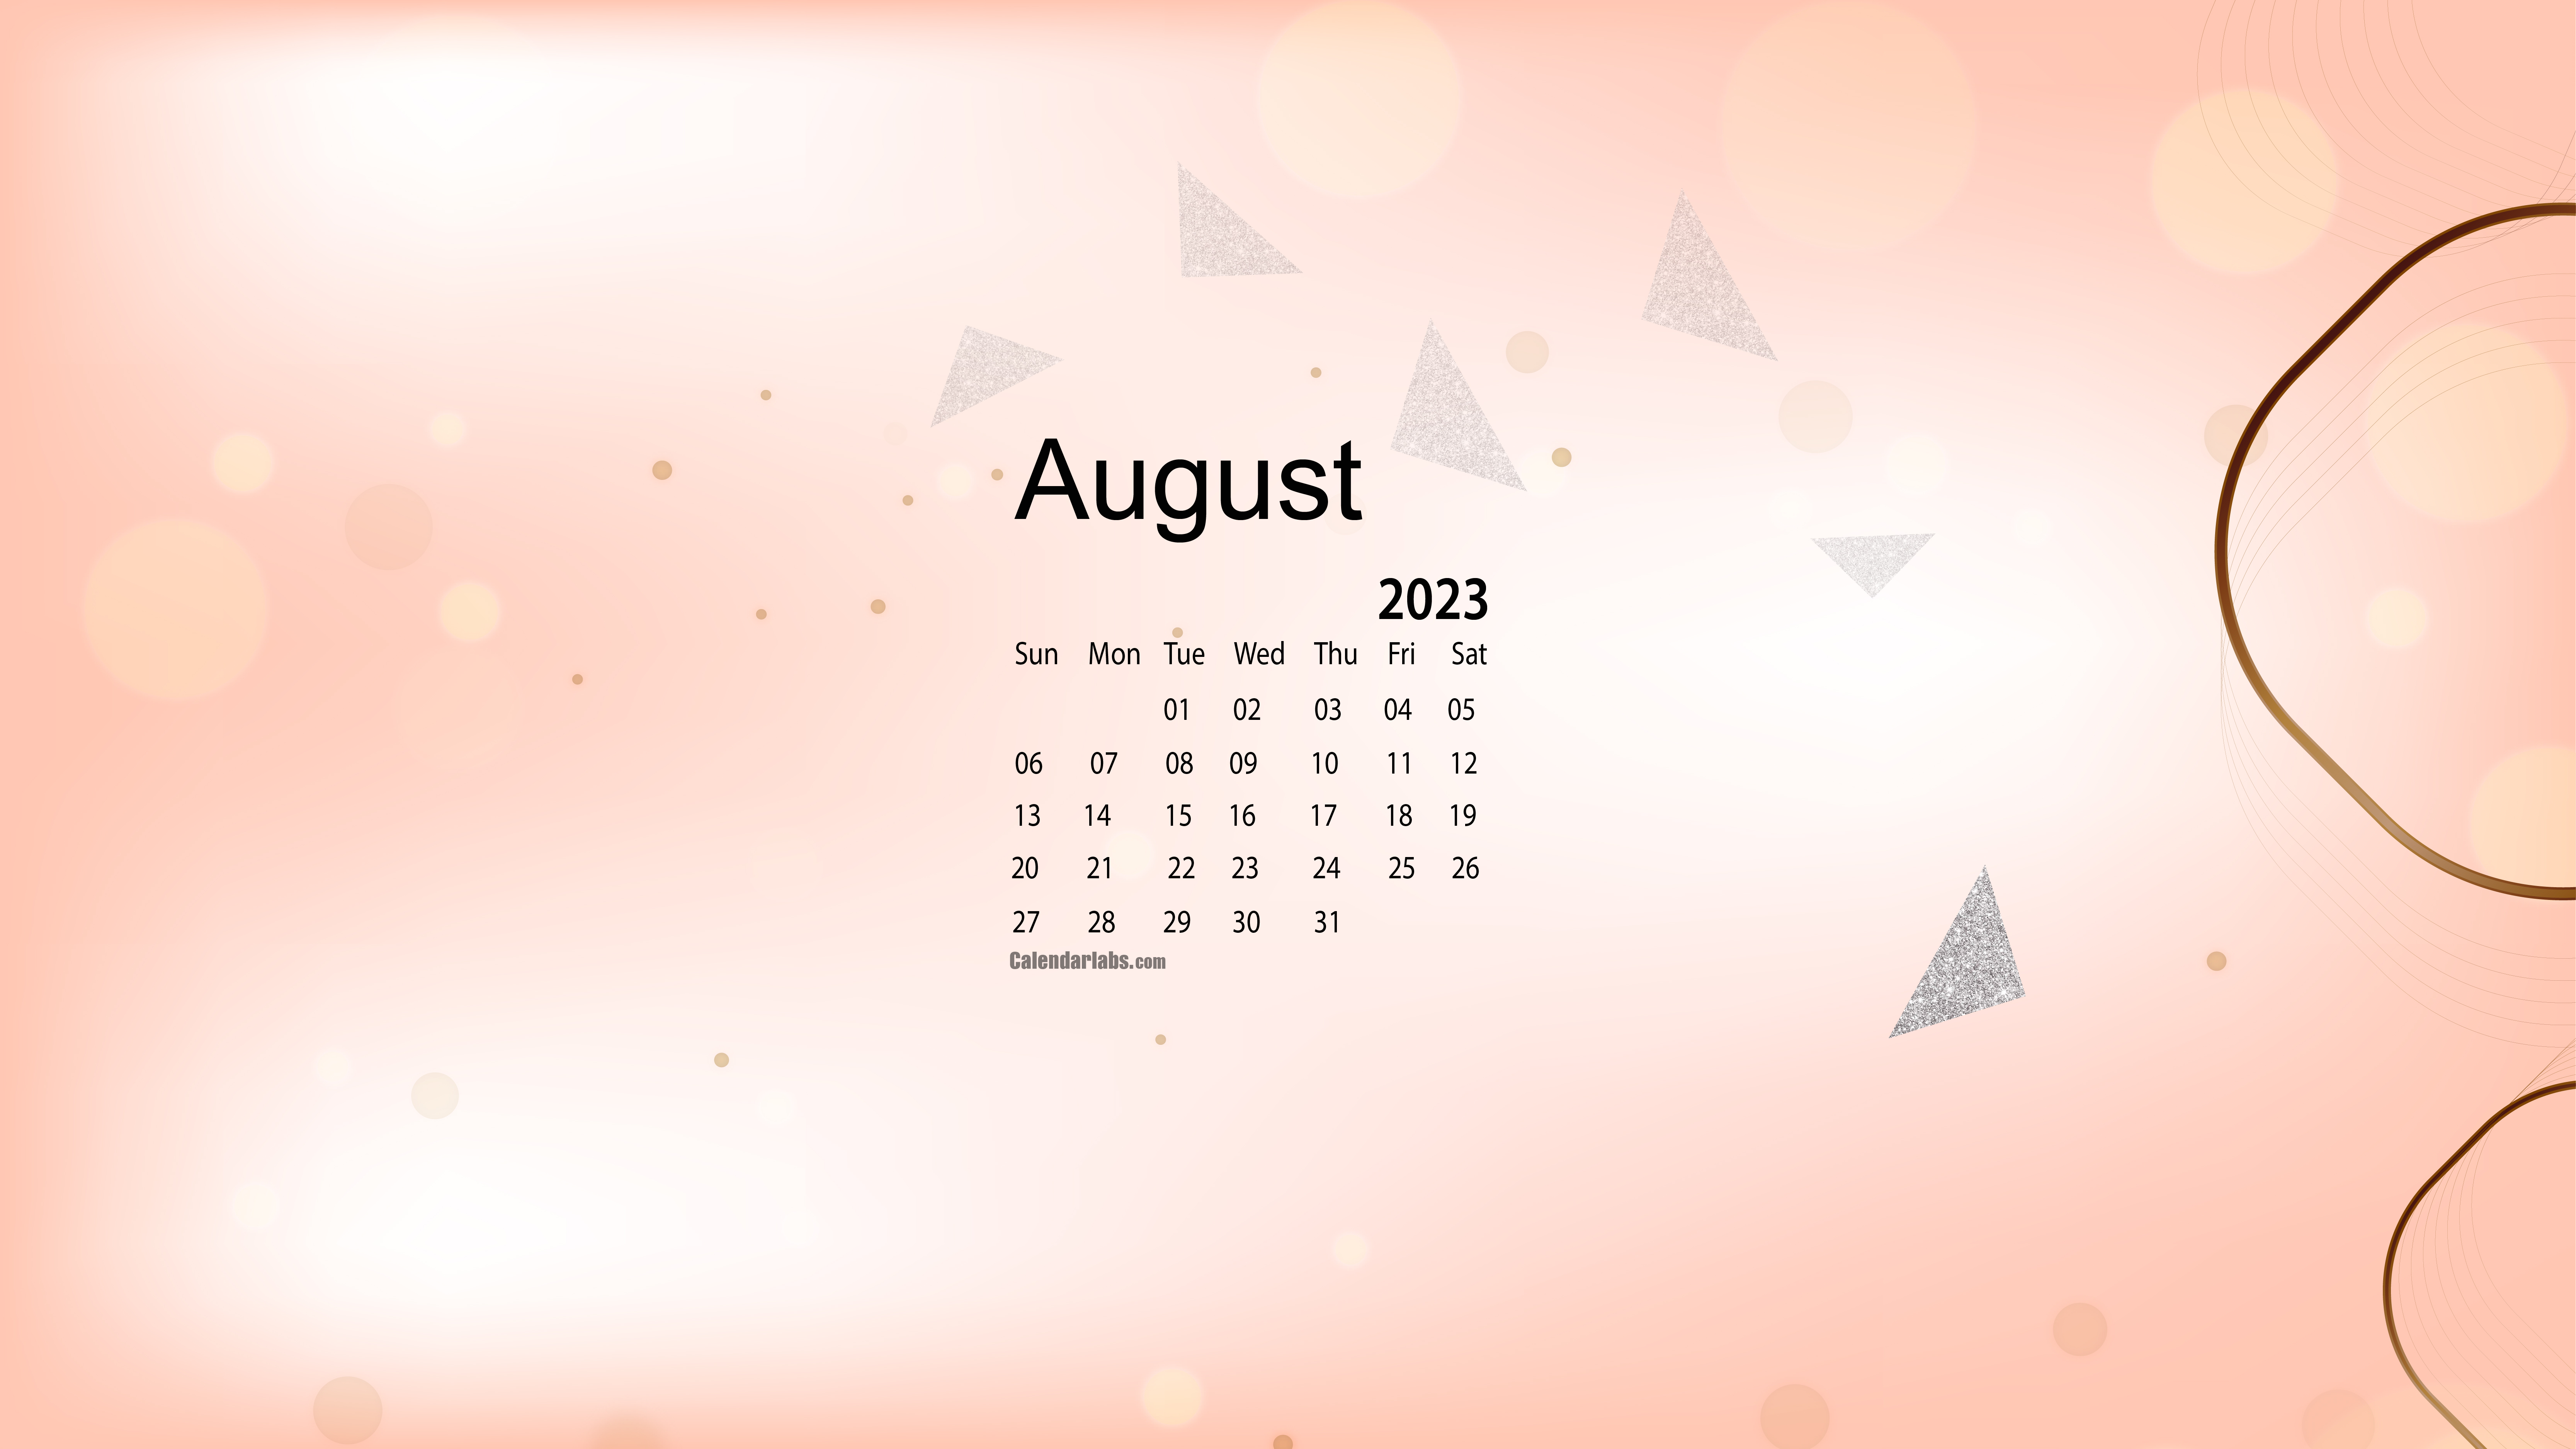 August 2021 wallpapers  33 FREE calendars for desktop and phones